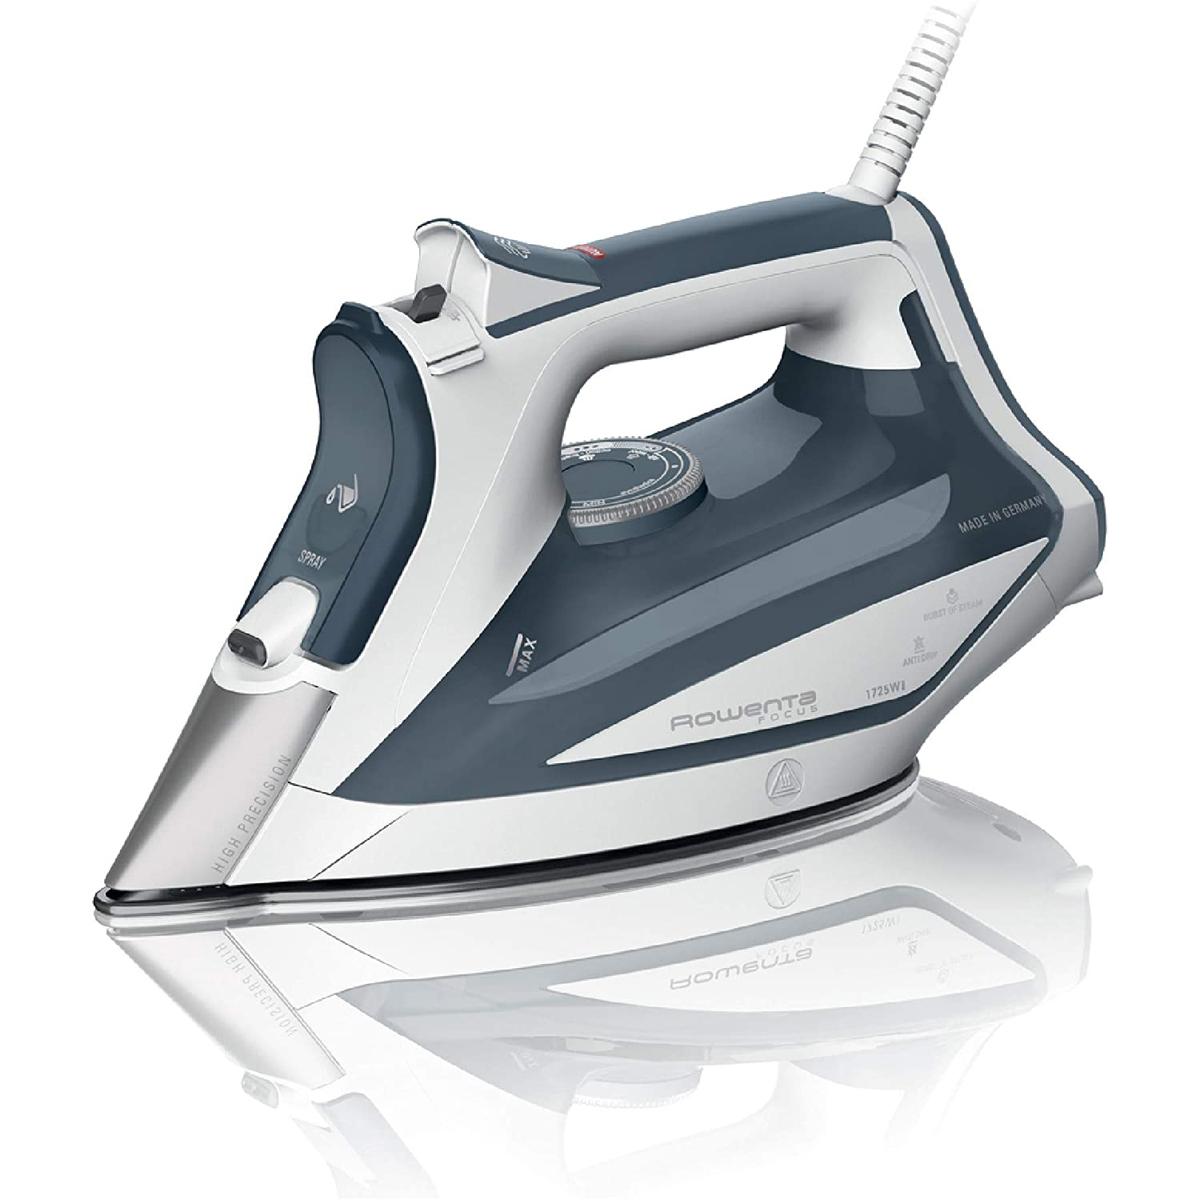 Rowenta Professional DW5280 1725W Steam Iron for $52.49 Shipped